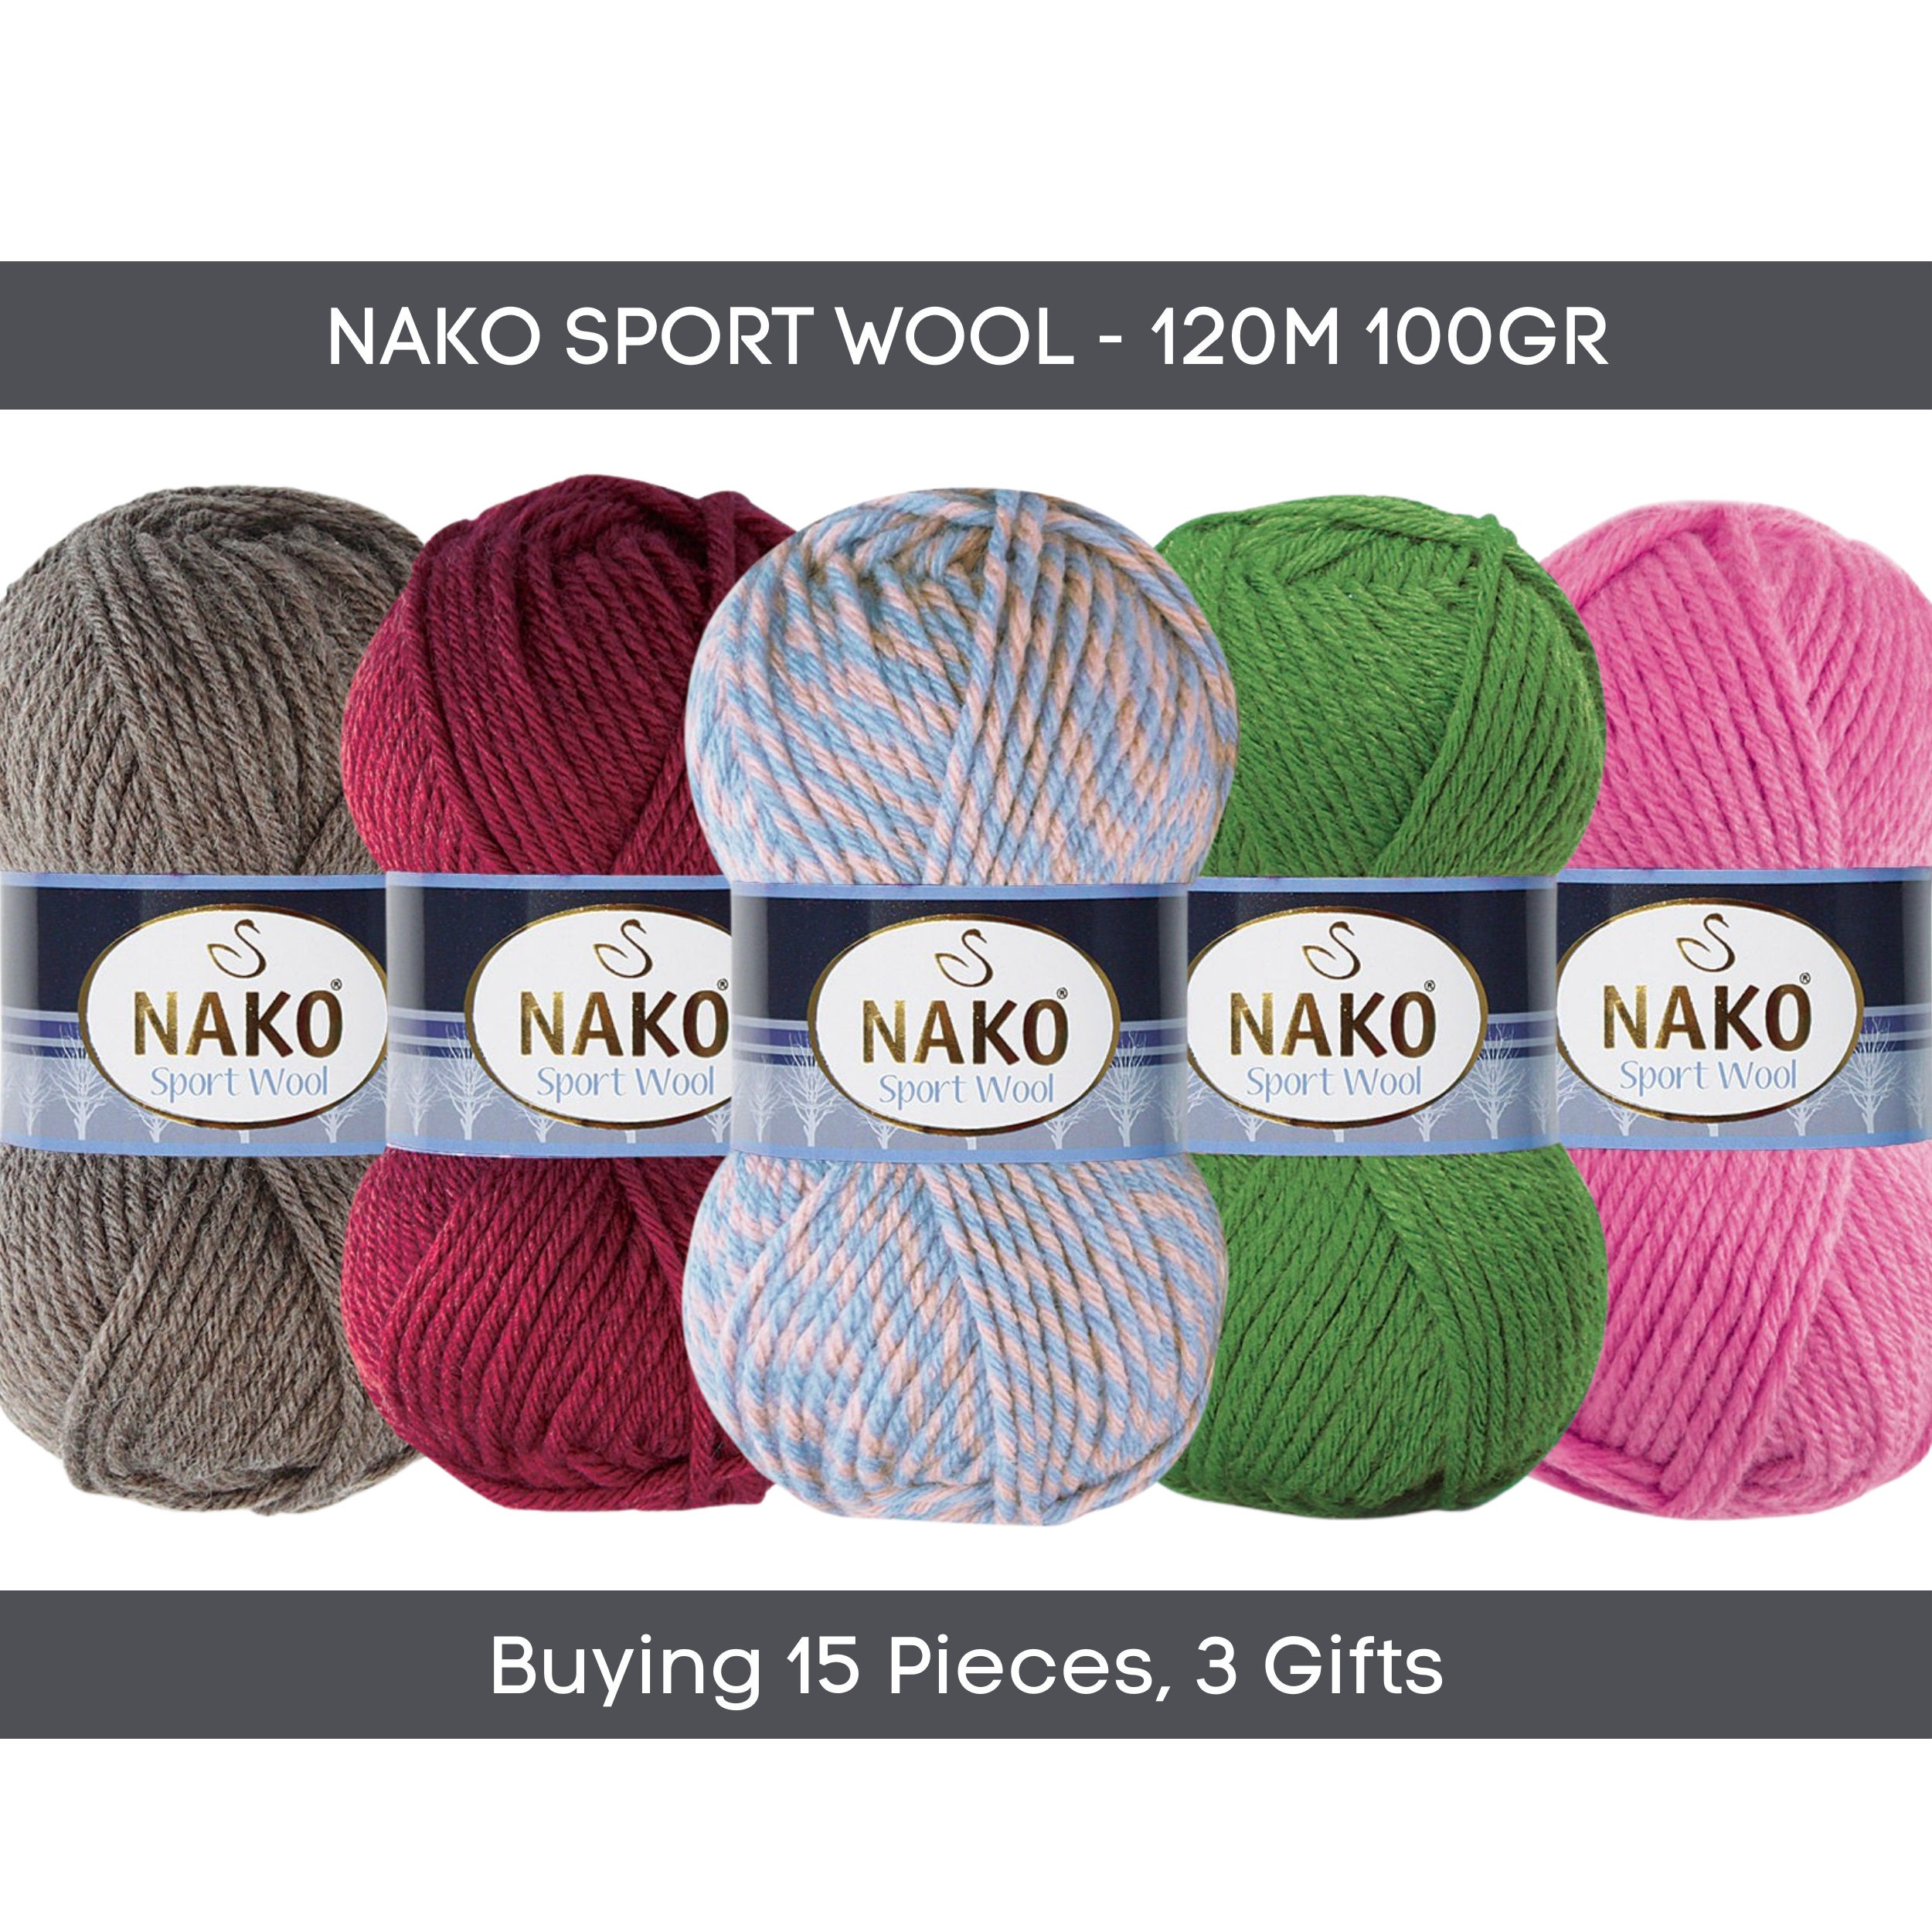 Wool Yarn NAKO SPORT WOOL, Chunky Yarn, Bulky Yarn, Size 5, Suitable for  Knitted Accessories Hats, Scarfs, Mittens or Cardigans -  Denmark